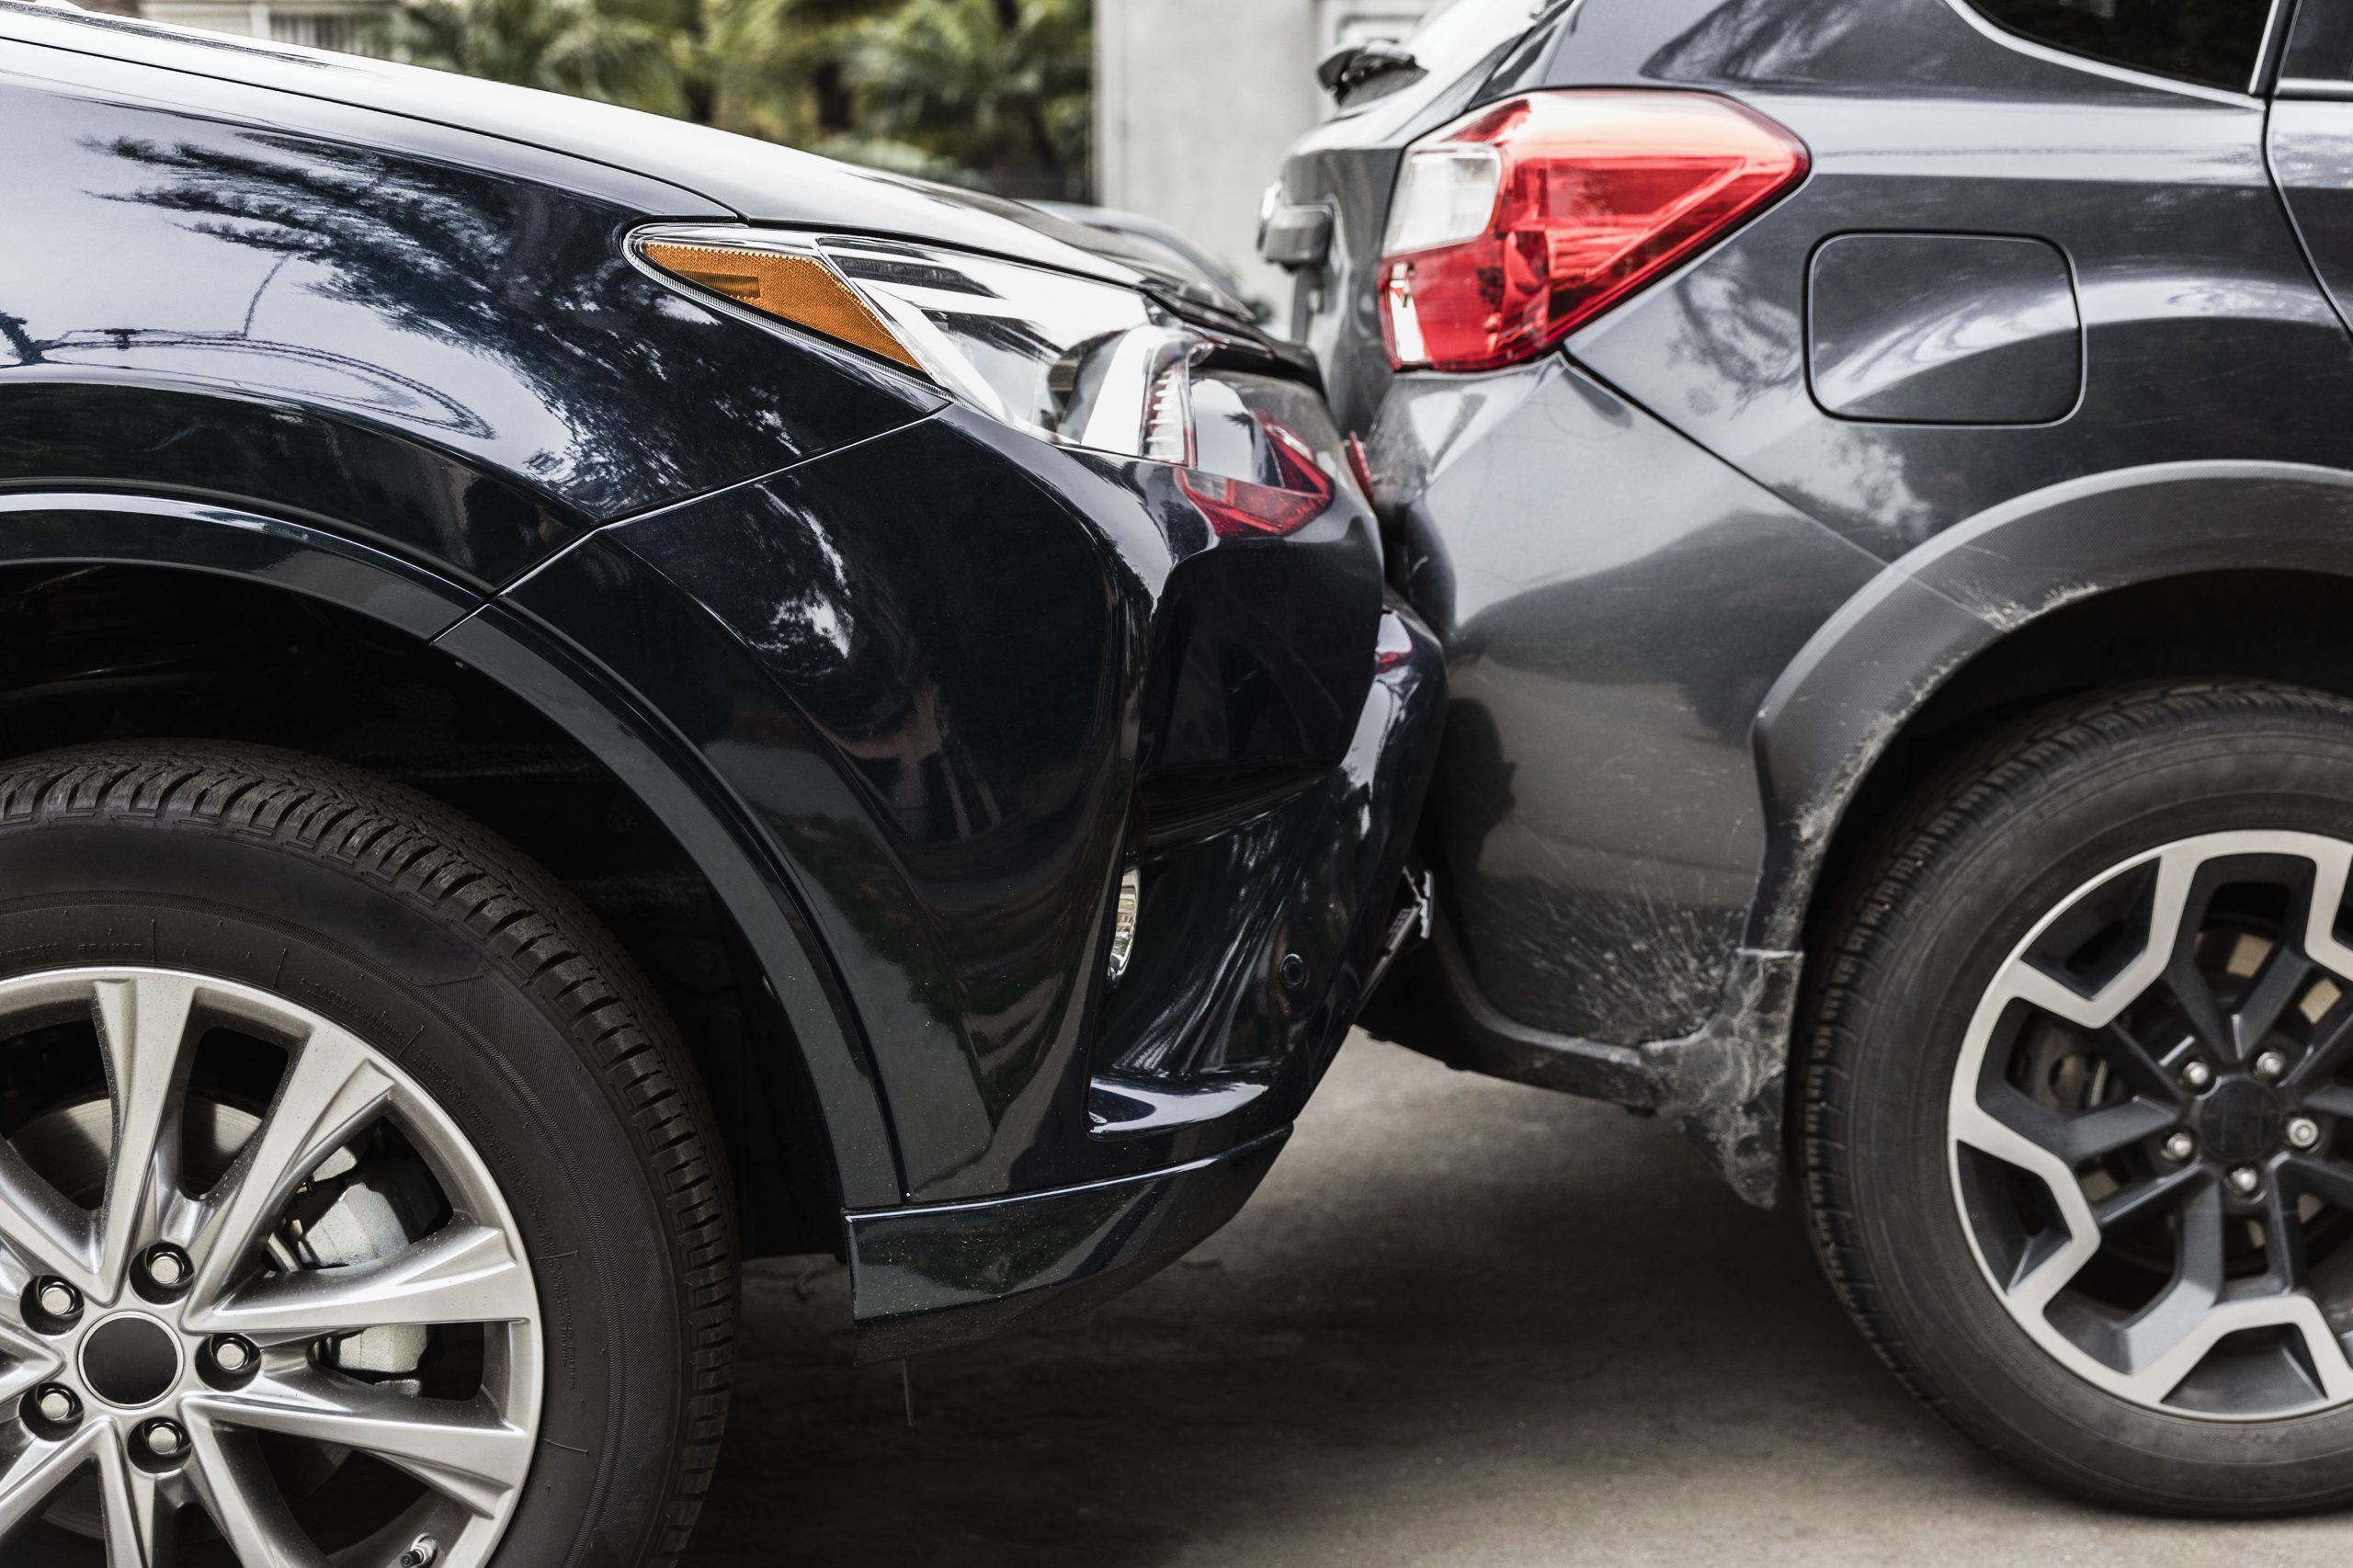 Collision Insurance Definition with measurements 5018 X 3345